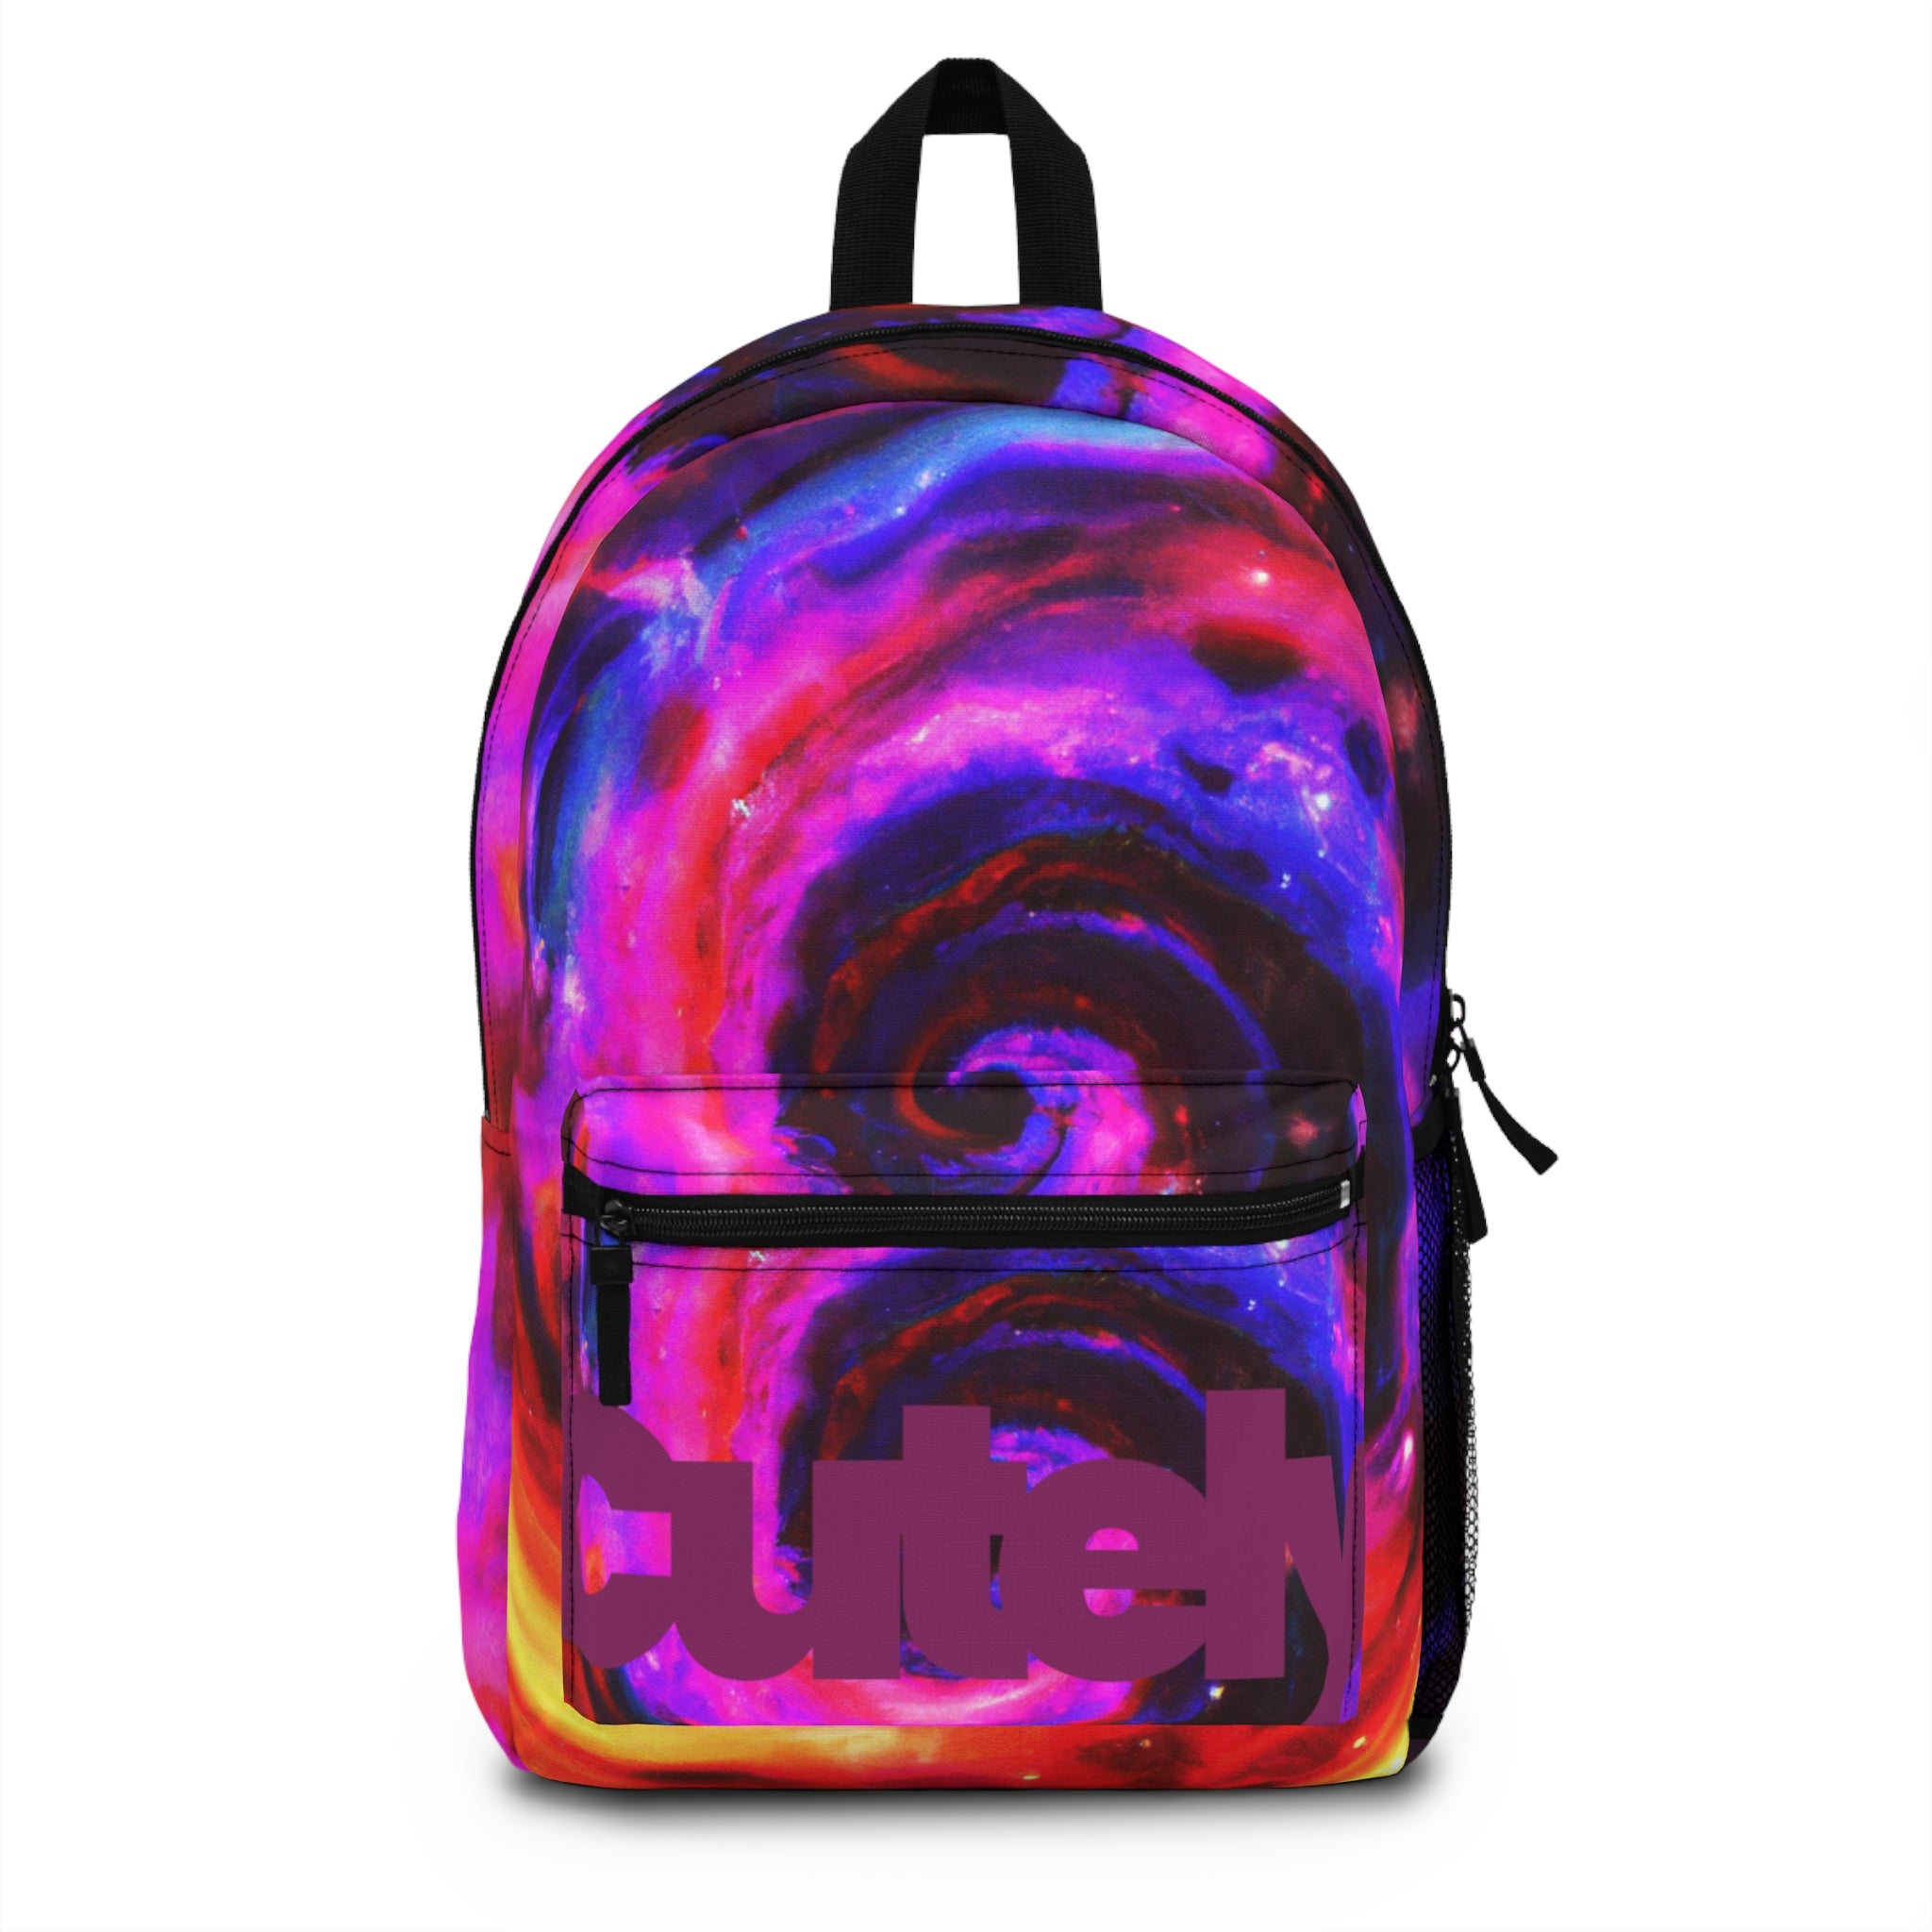 "The Dimensional Voyage: A Backpack Through Galaxies and Beyond"- Backpack